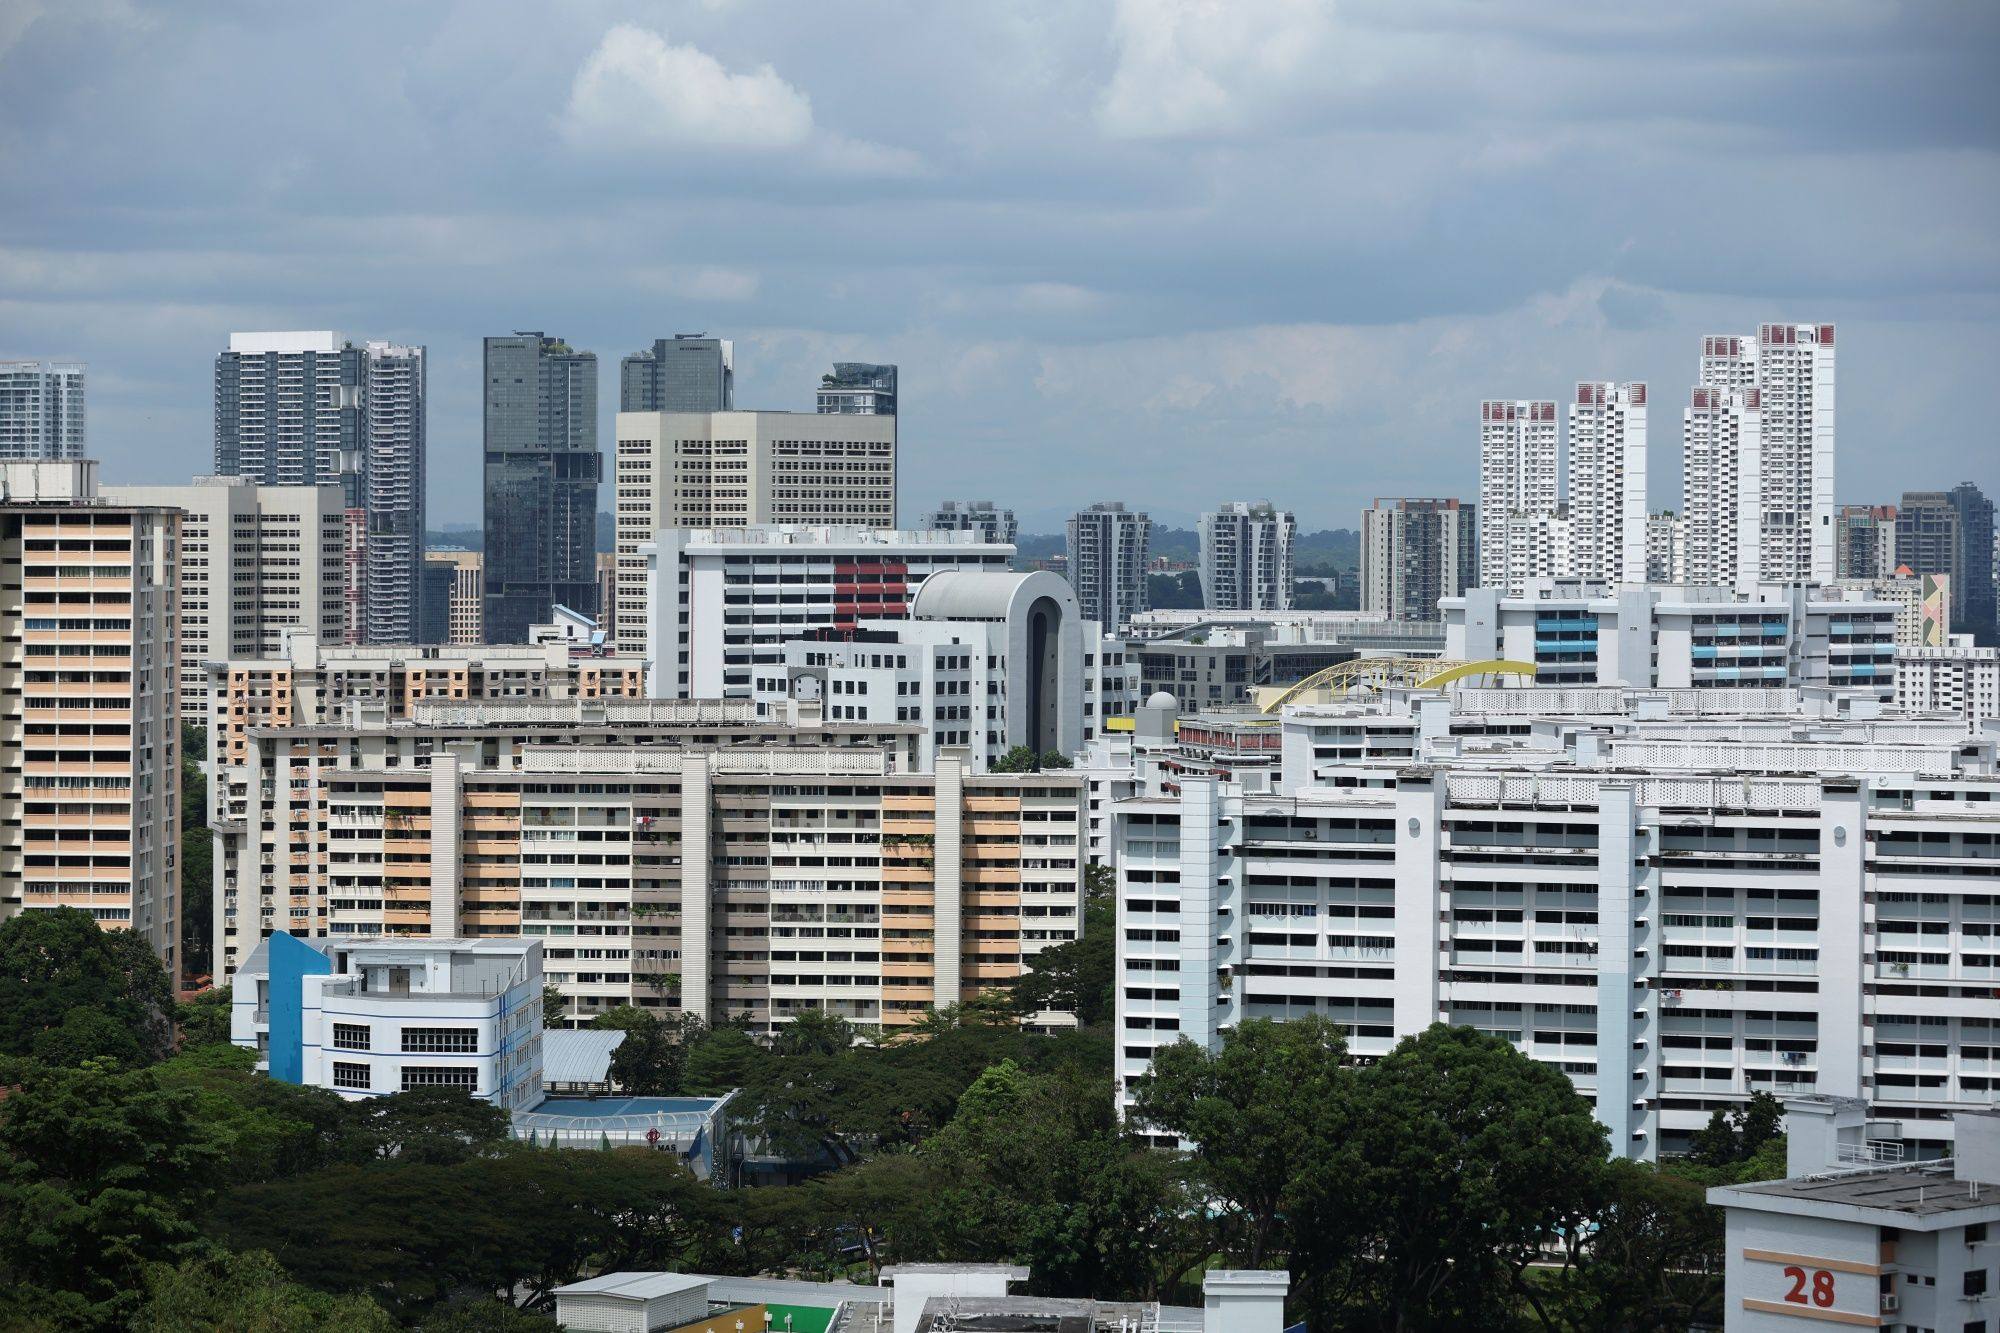 Residential buildings in Singapore on January 3, 2023. Photo: Bloomberg